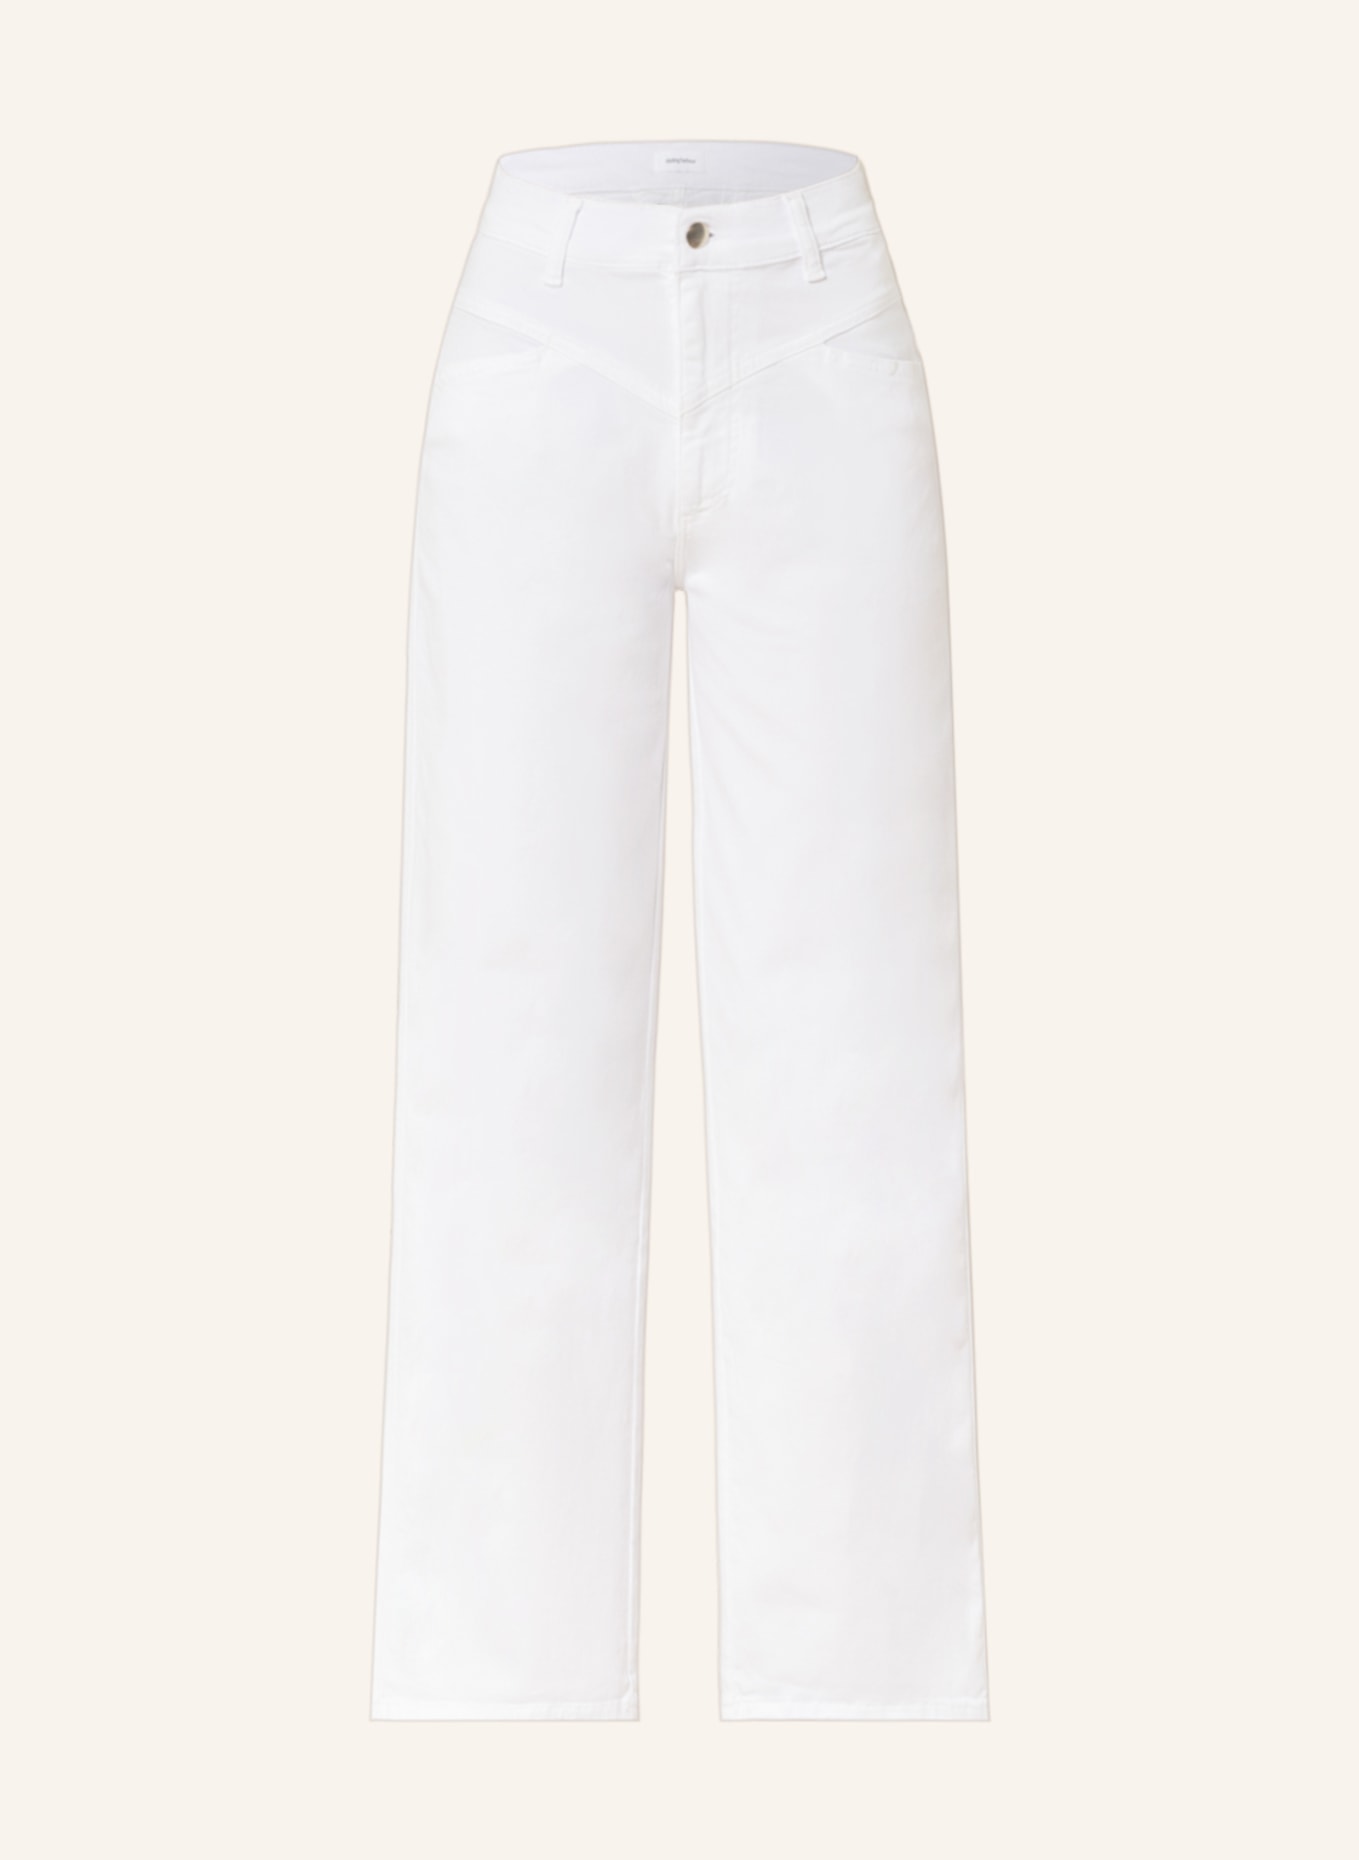 darling harbour Jeans-Culotte, Farbe: WEISS (Bild 1)